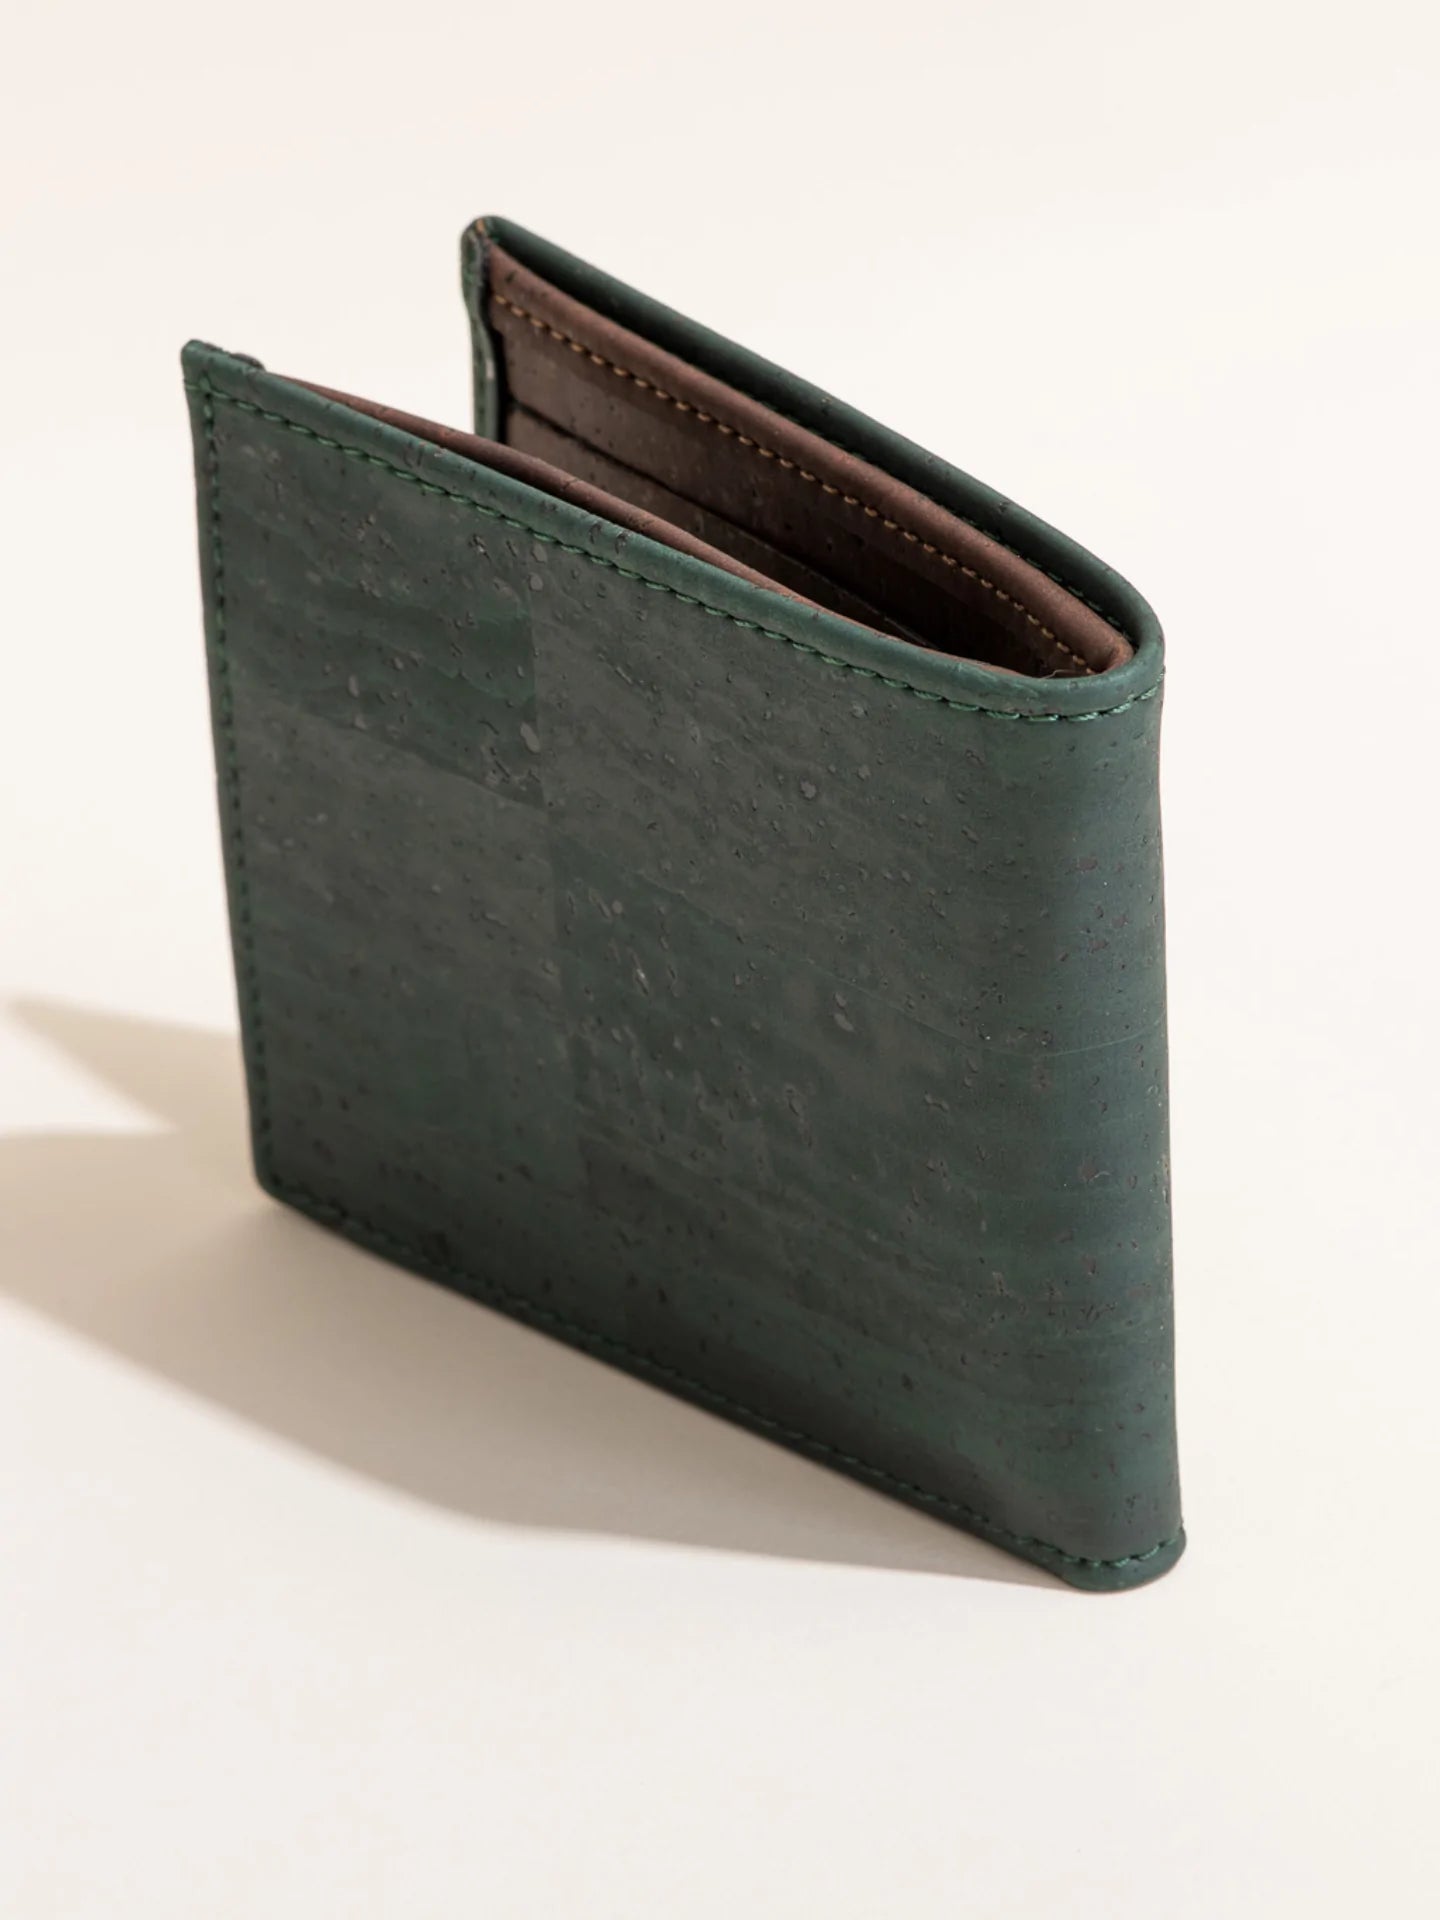 Gentleman's Wallet with Coin Pocket - BagLunchproduct,corp